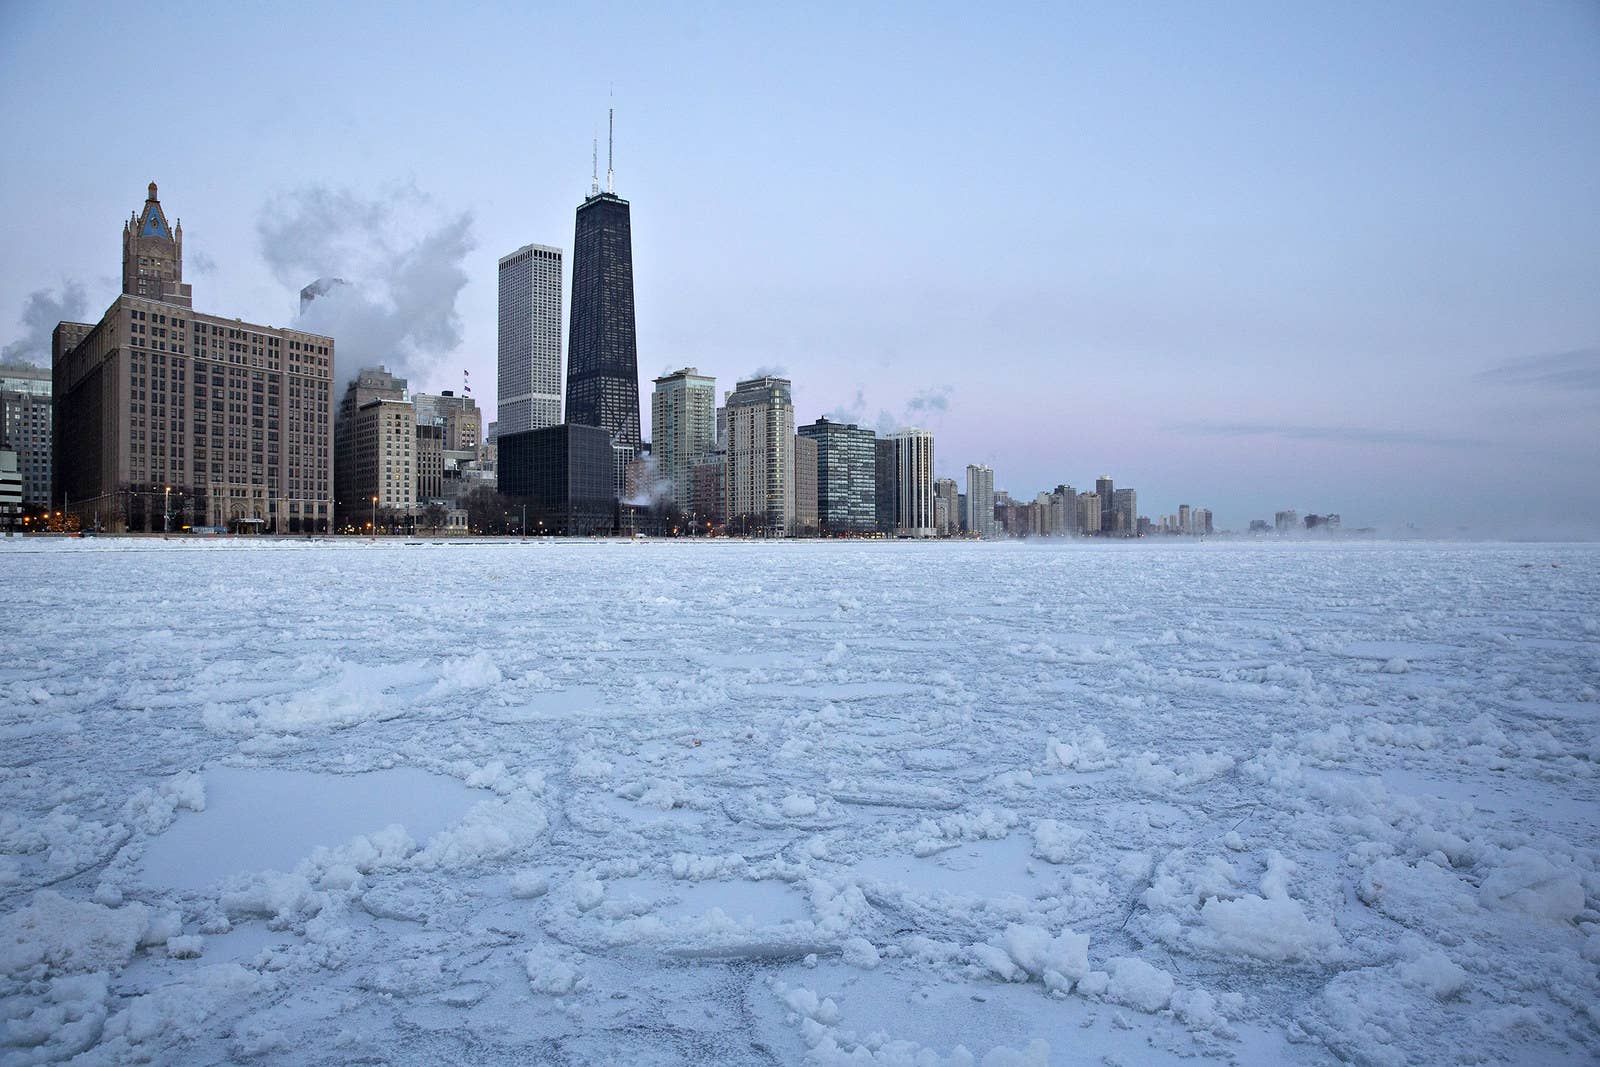 Ice floats on Lake Michigan in Chicago on Wednesday morning.